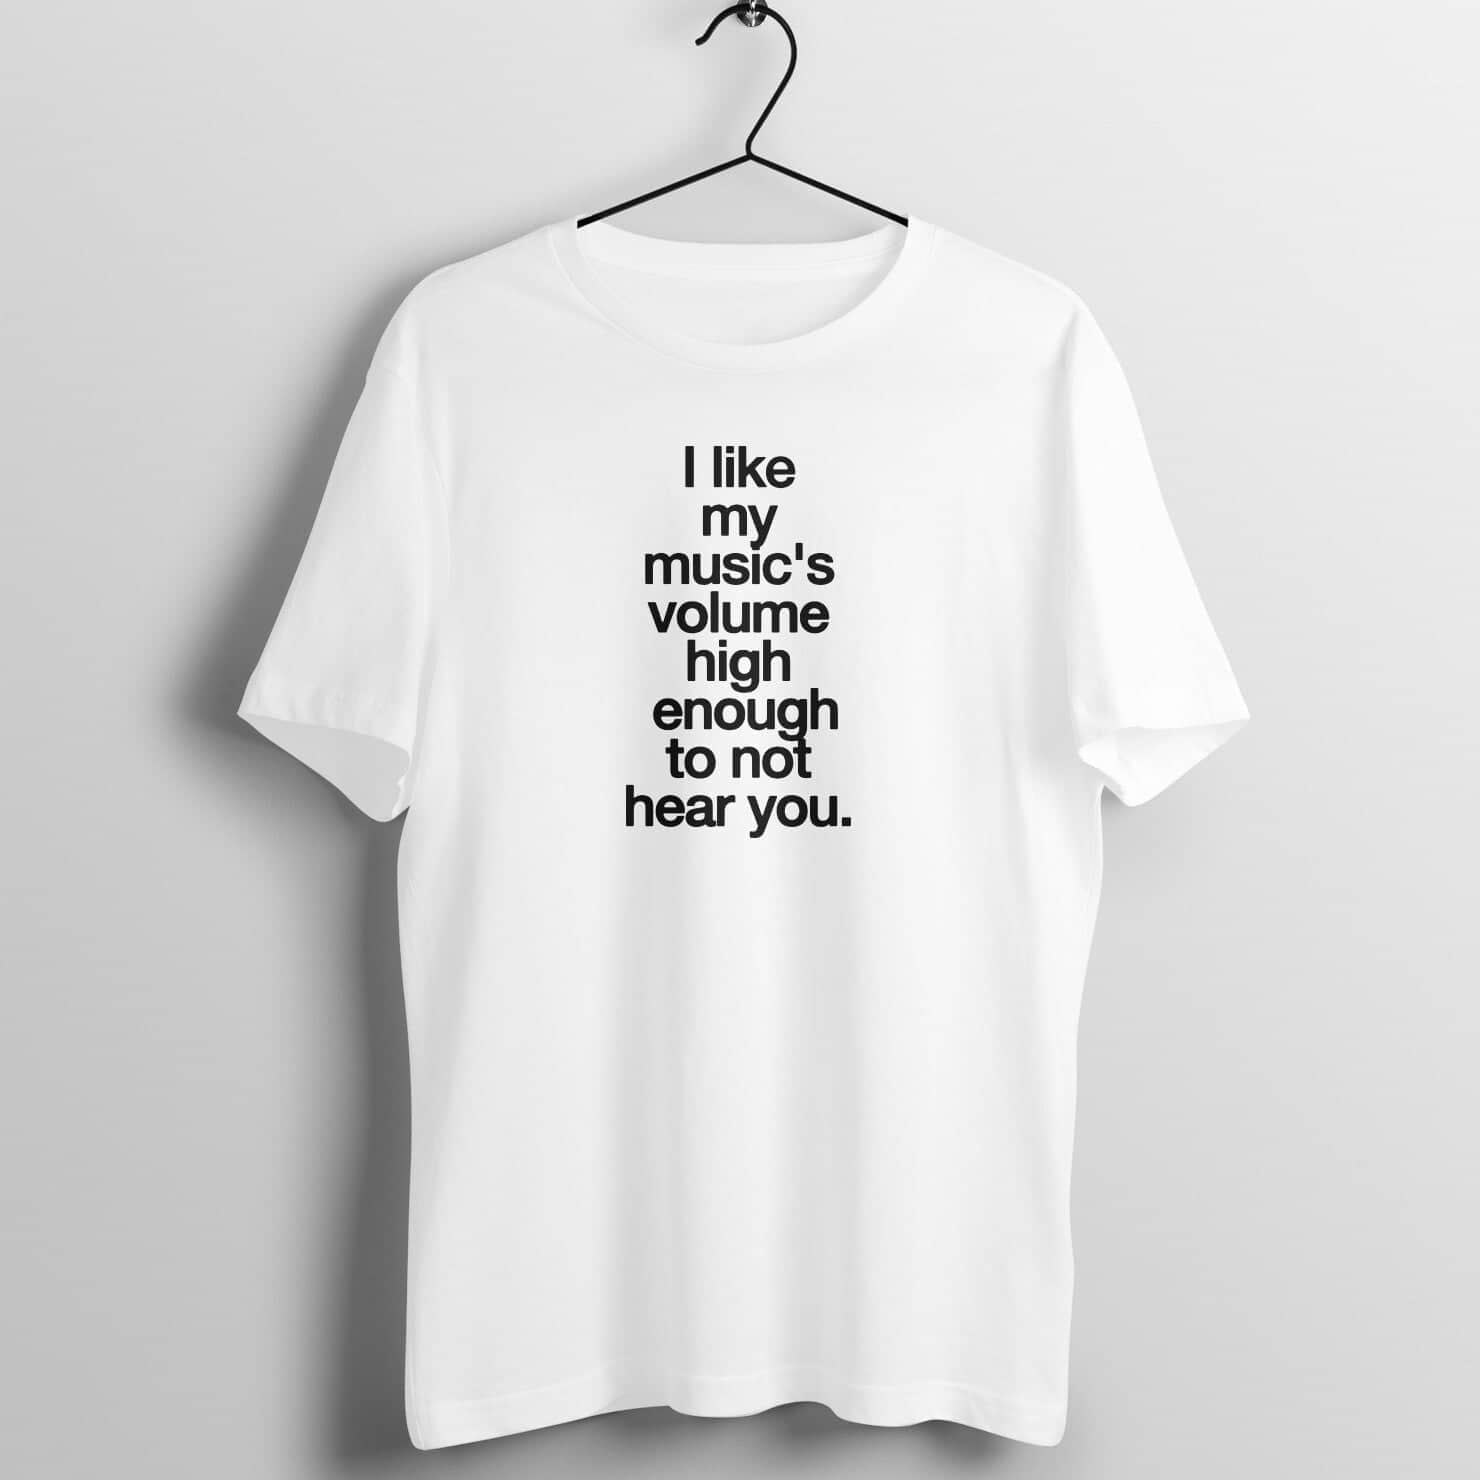 I Like My Music High Enough Not to Hear You Funny White T Shirt for Men and Women Printrove White S 